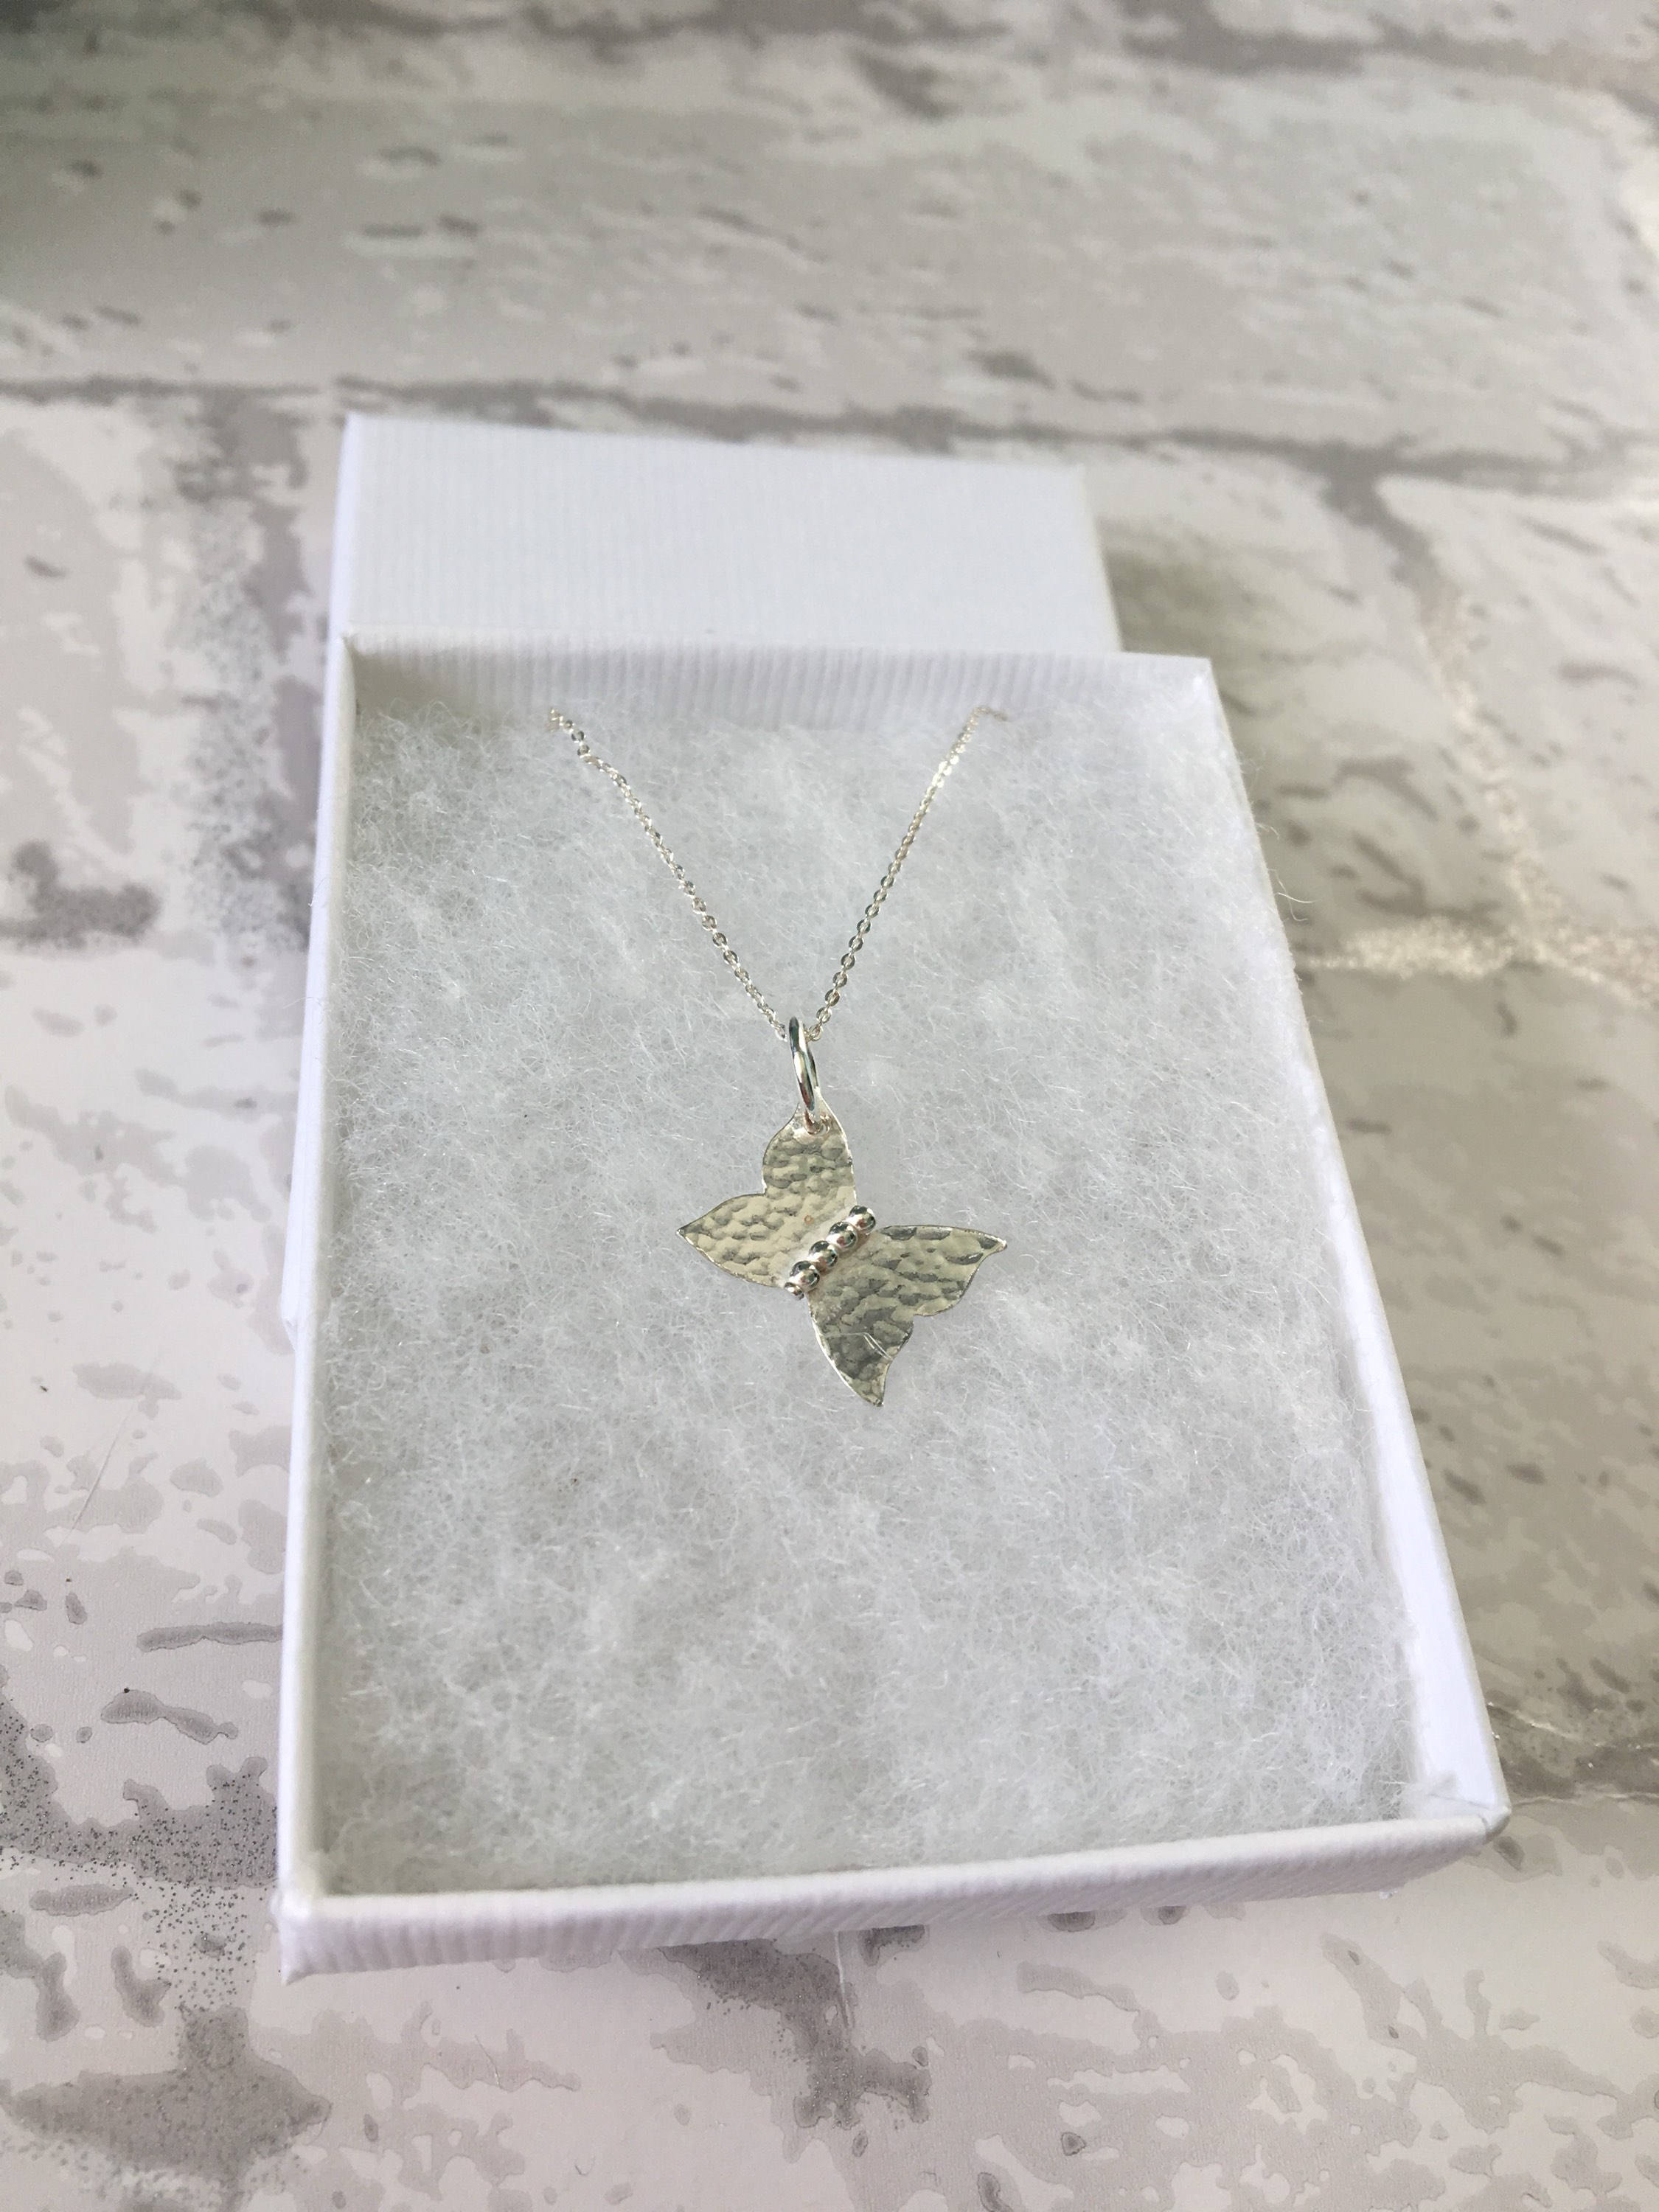 Butterfly Necklace Sterling Silver Butterfly Charm Pendant | Etsy